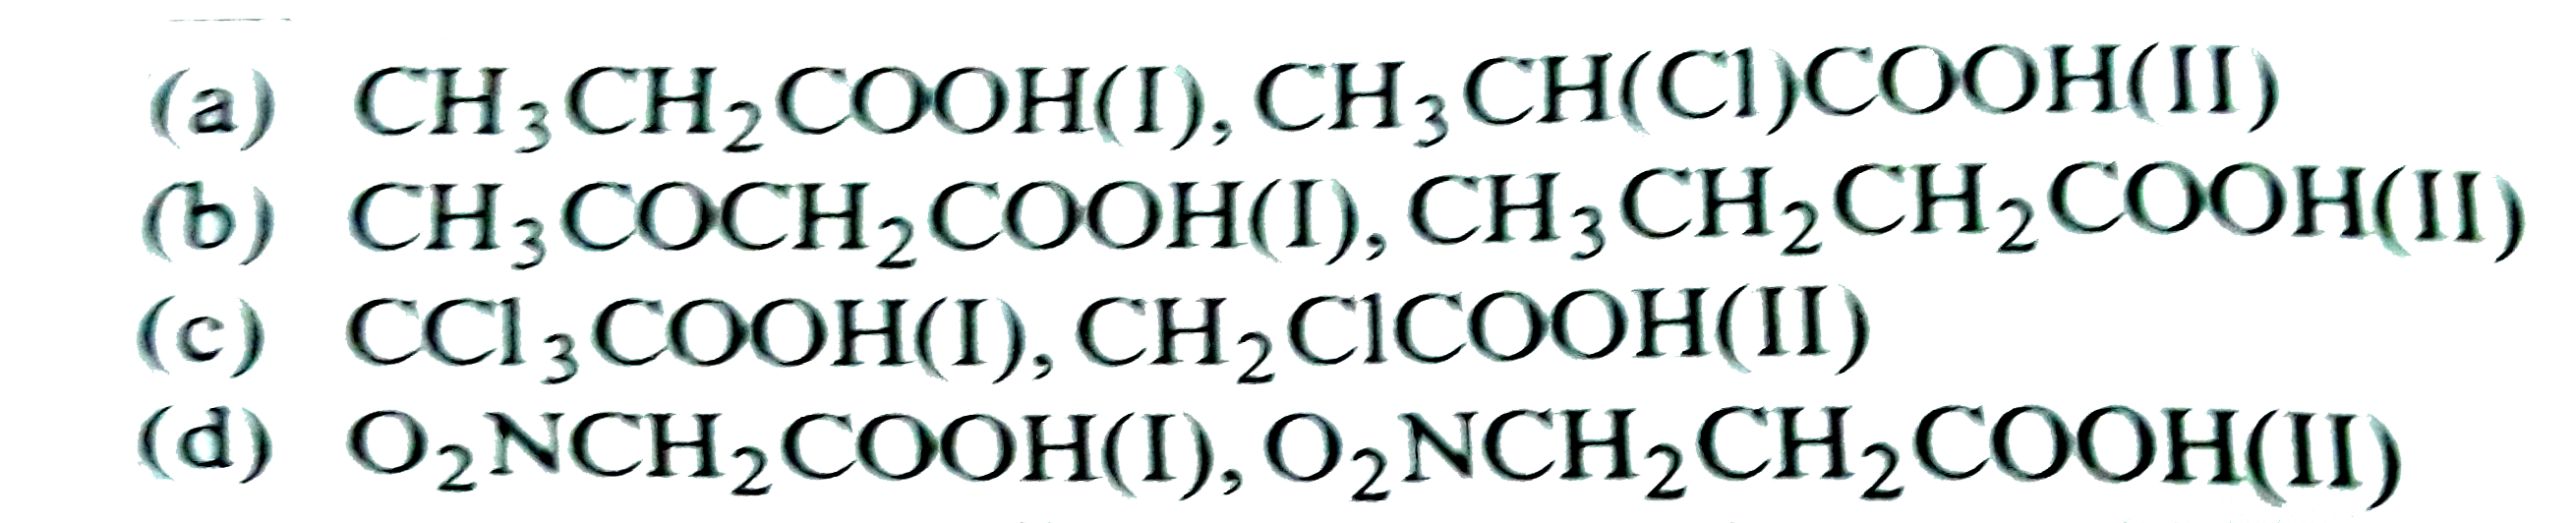 Which of the carboxylic acid among following pairs will undergo decarboxylation readily?